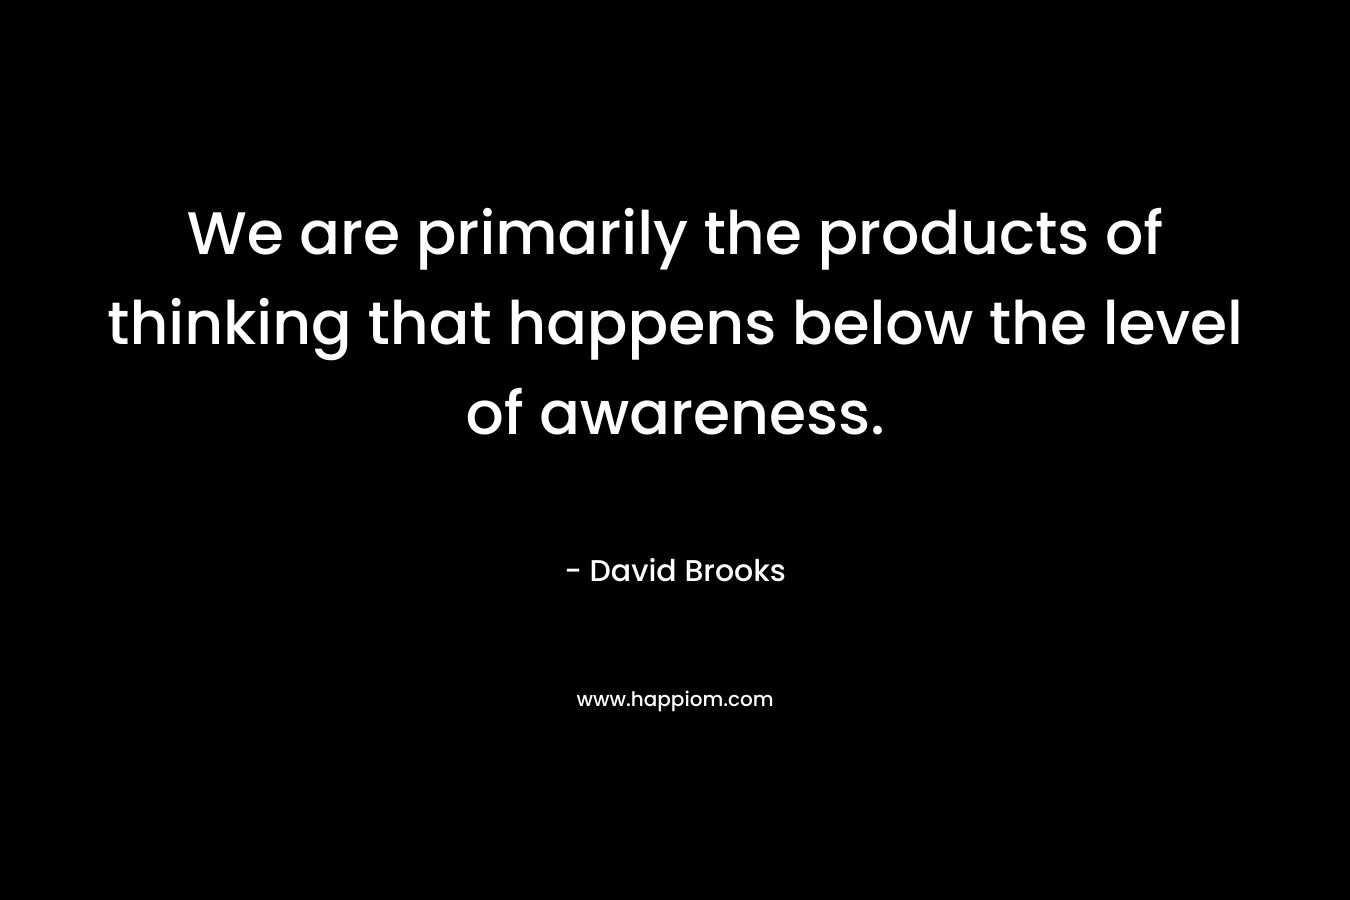 We are primarily the products of thinking that happens below the level of awareness. – David Brooks